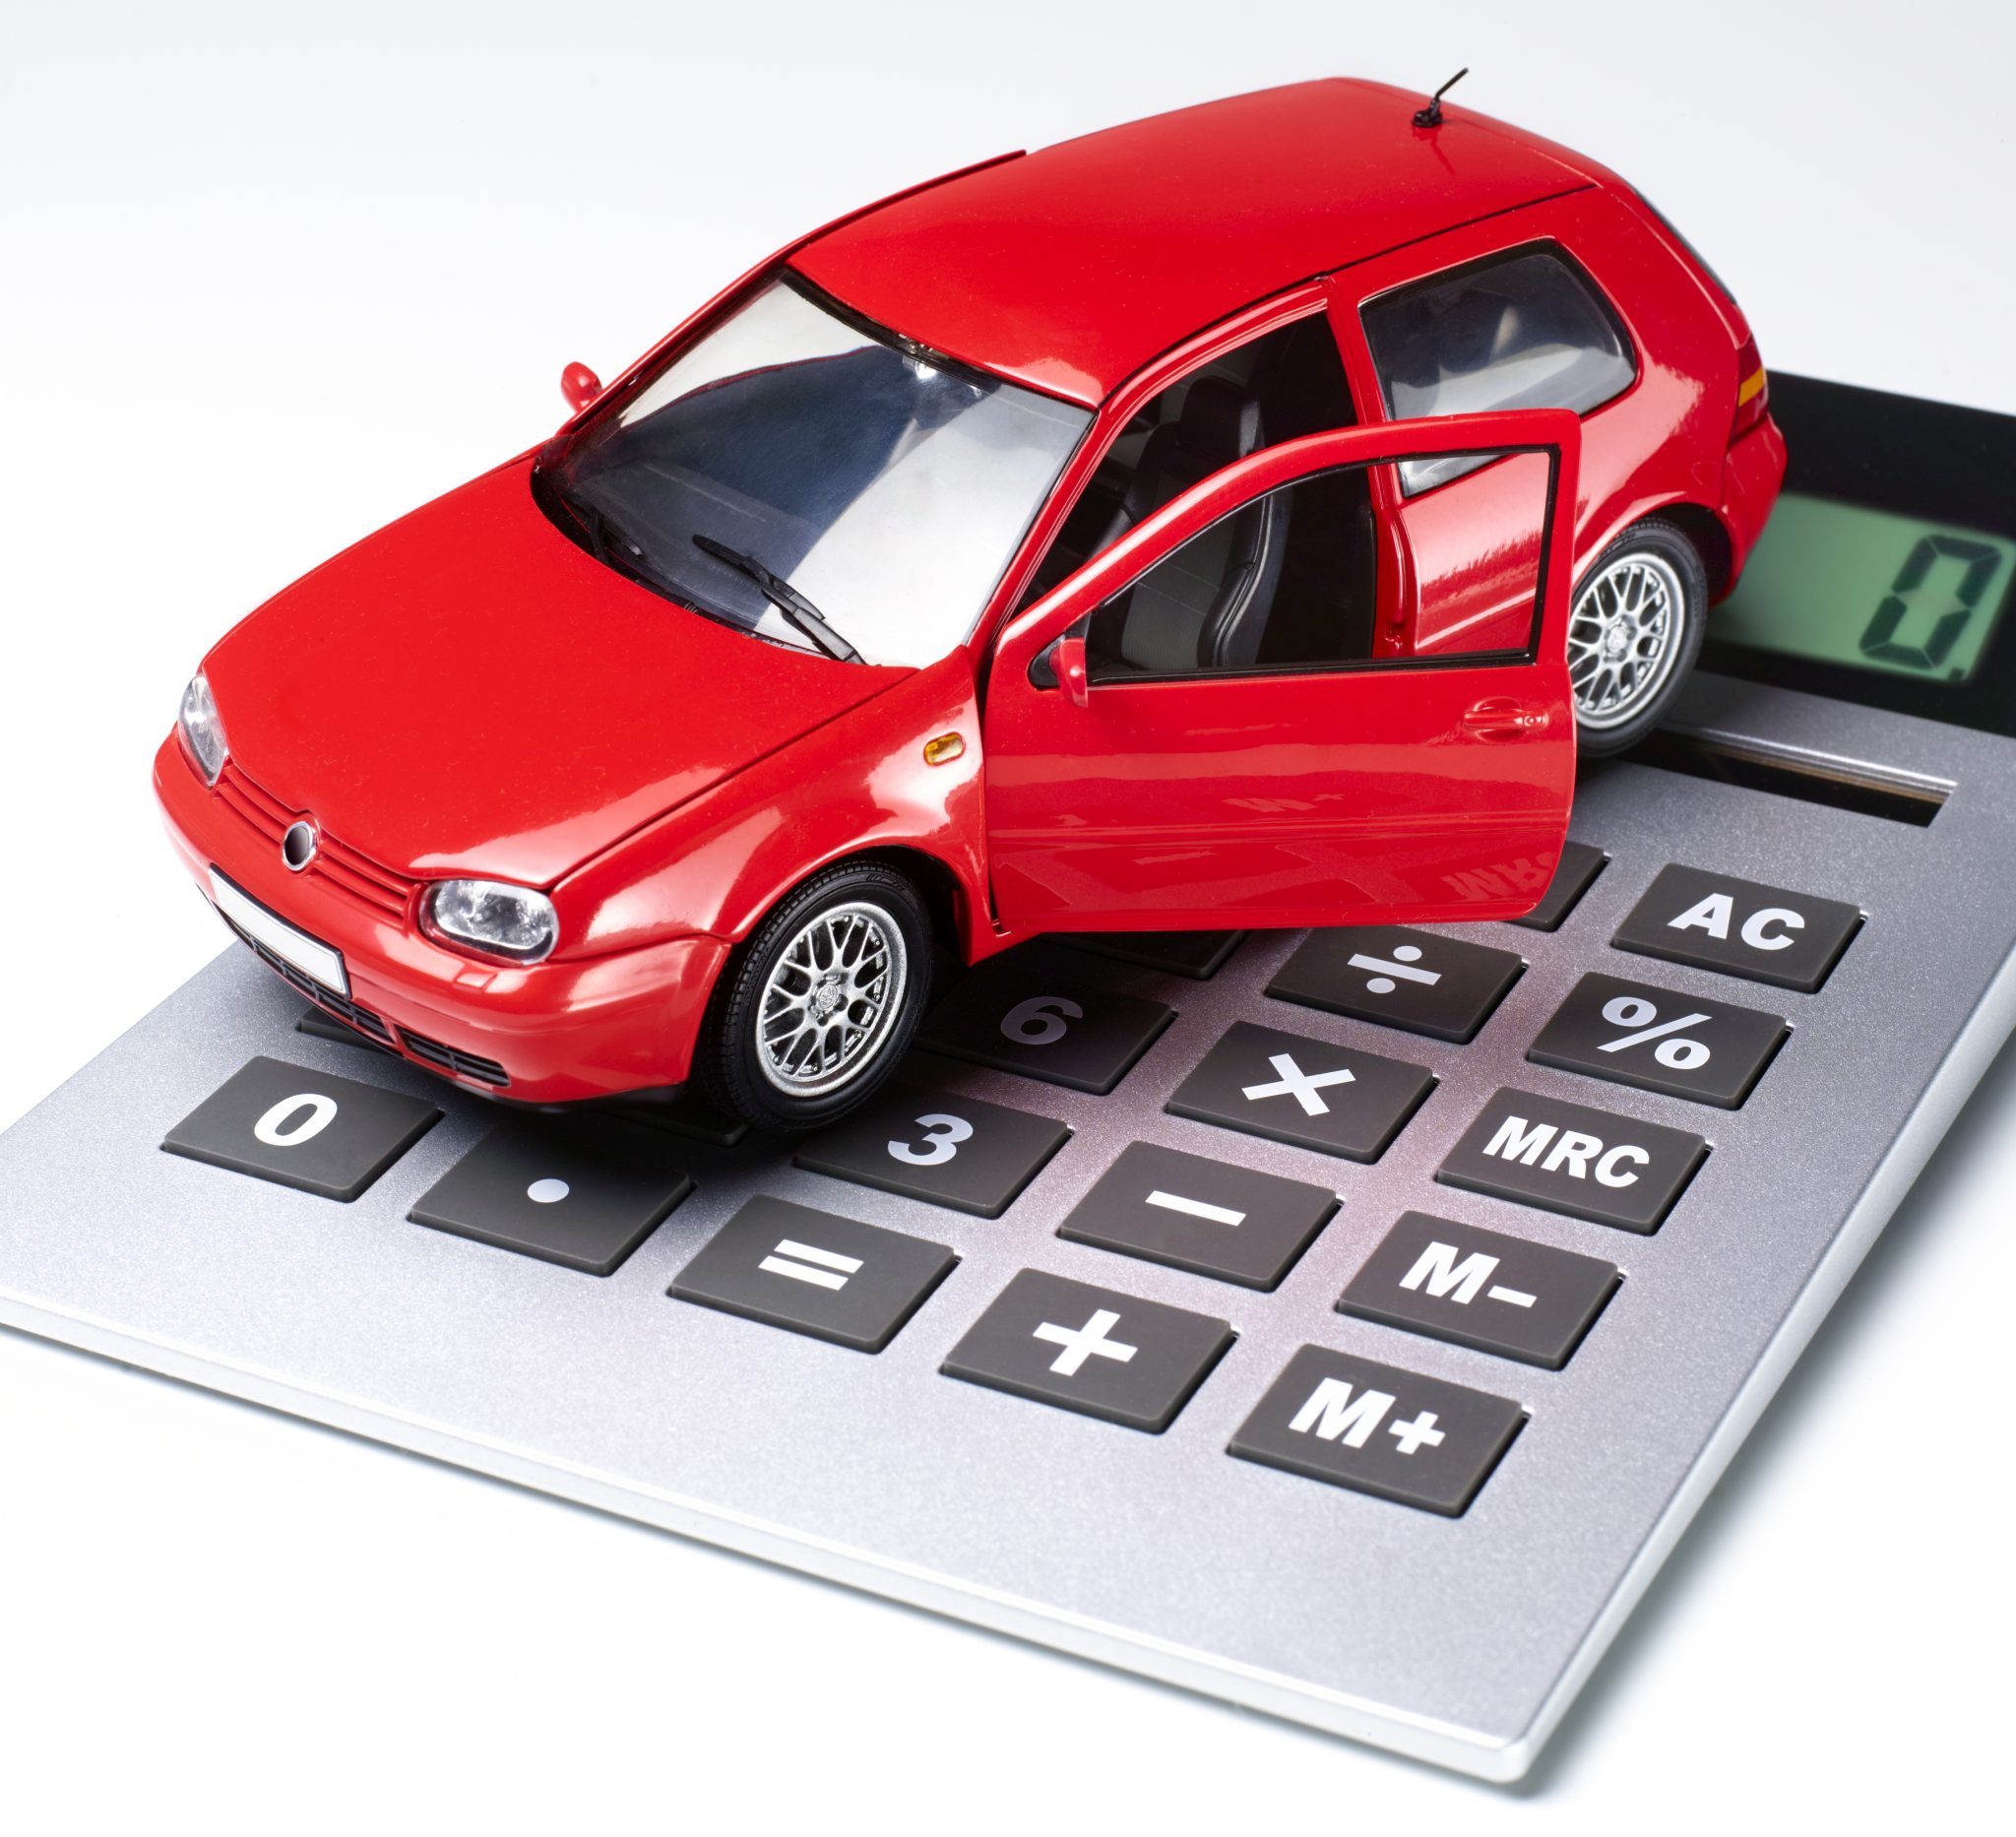 Used Auto Loan Calculator – Learn the benefits of the calculator